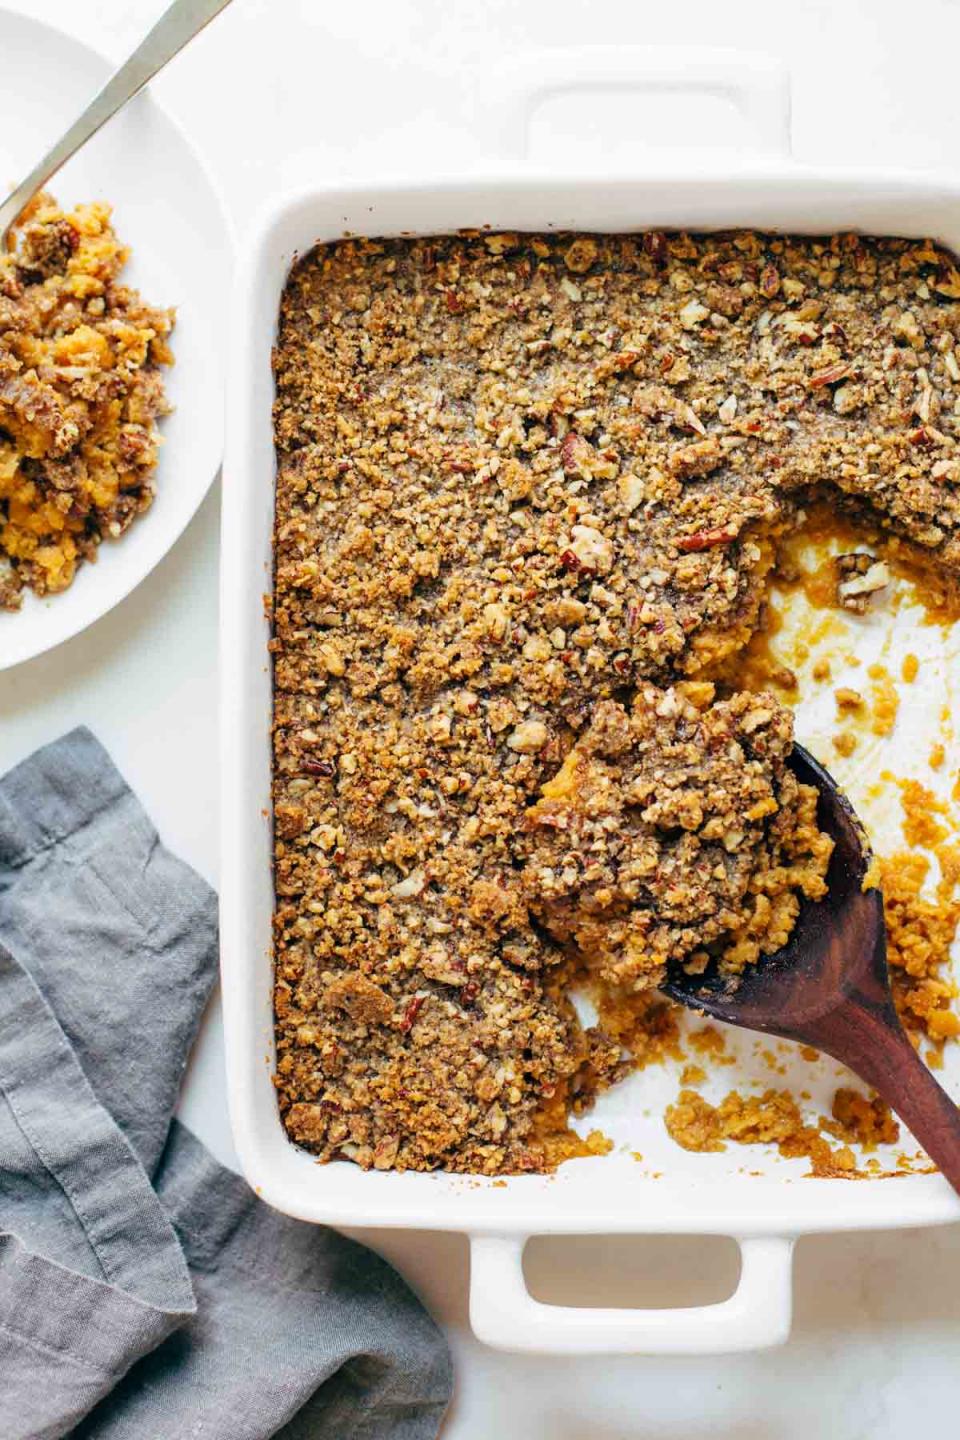 Sweet Potato Casserole With Brown Sugar Topping by Pinch of Yum